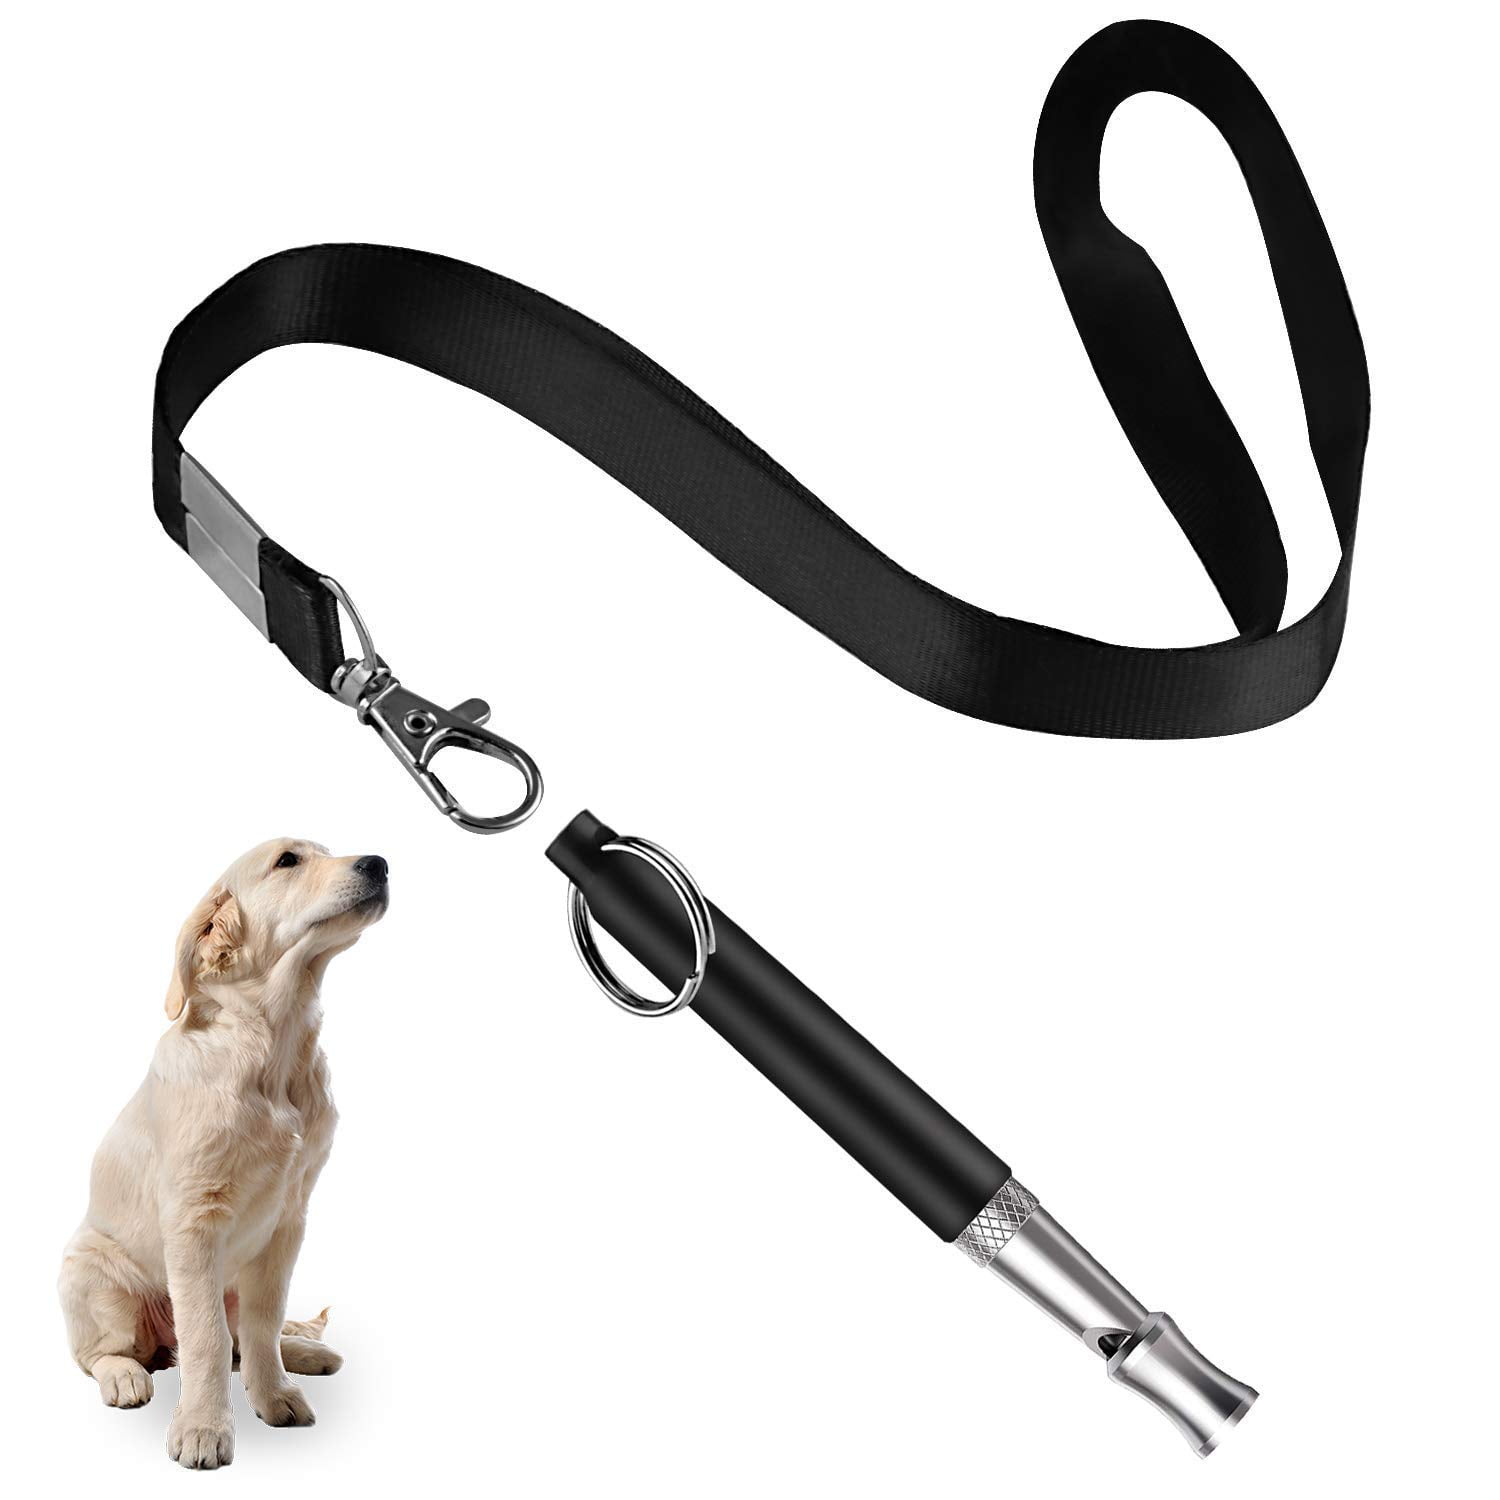 Dog Puppy Training With Strap Adjustable Whistle Silent Ultrasonic Pet Useful 